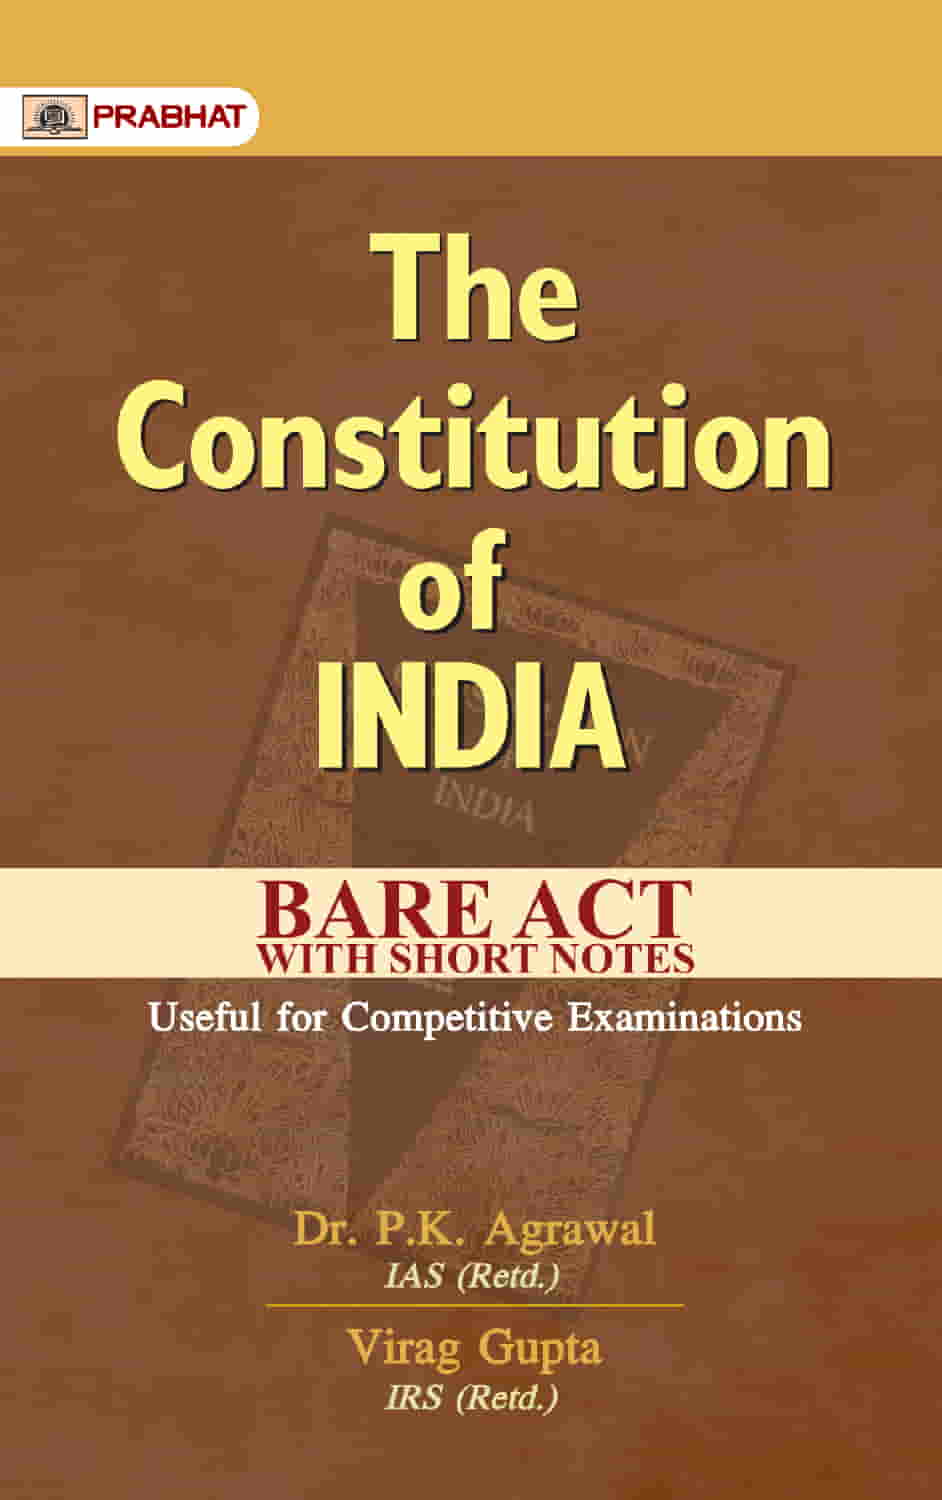 The Constitution of India Bare Act